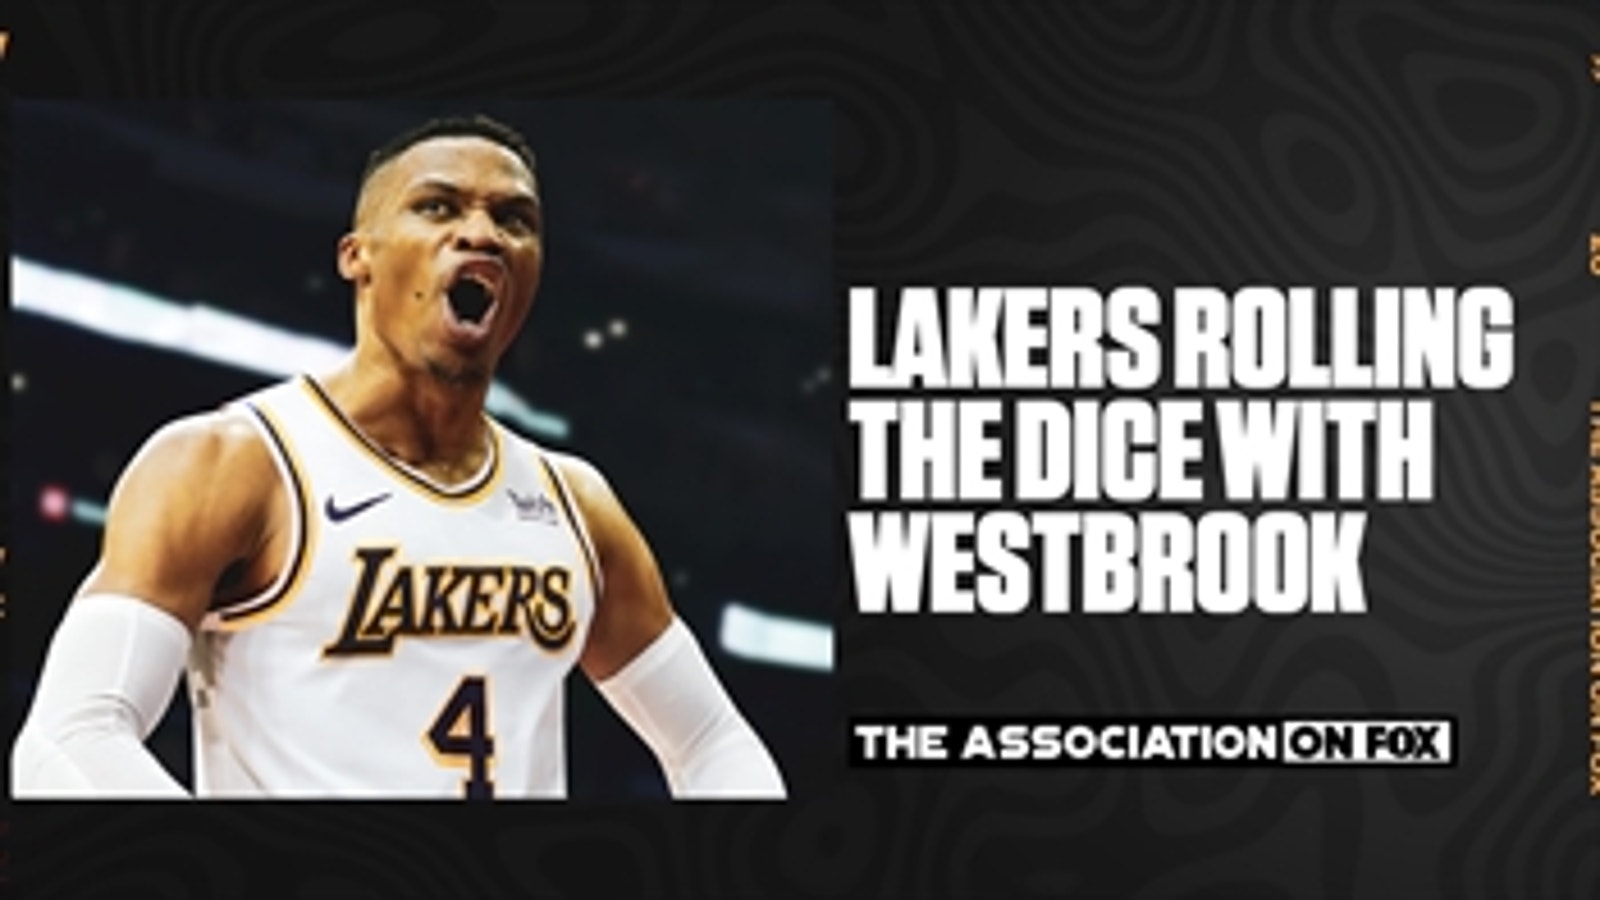 Russell Westbrook to the Lakers - Yaron Weitzman reacts to the trade.